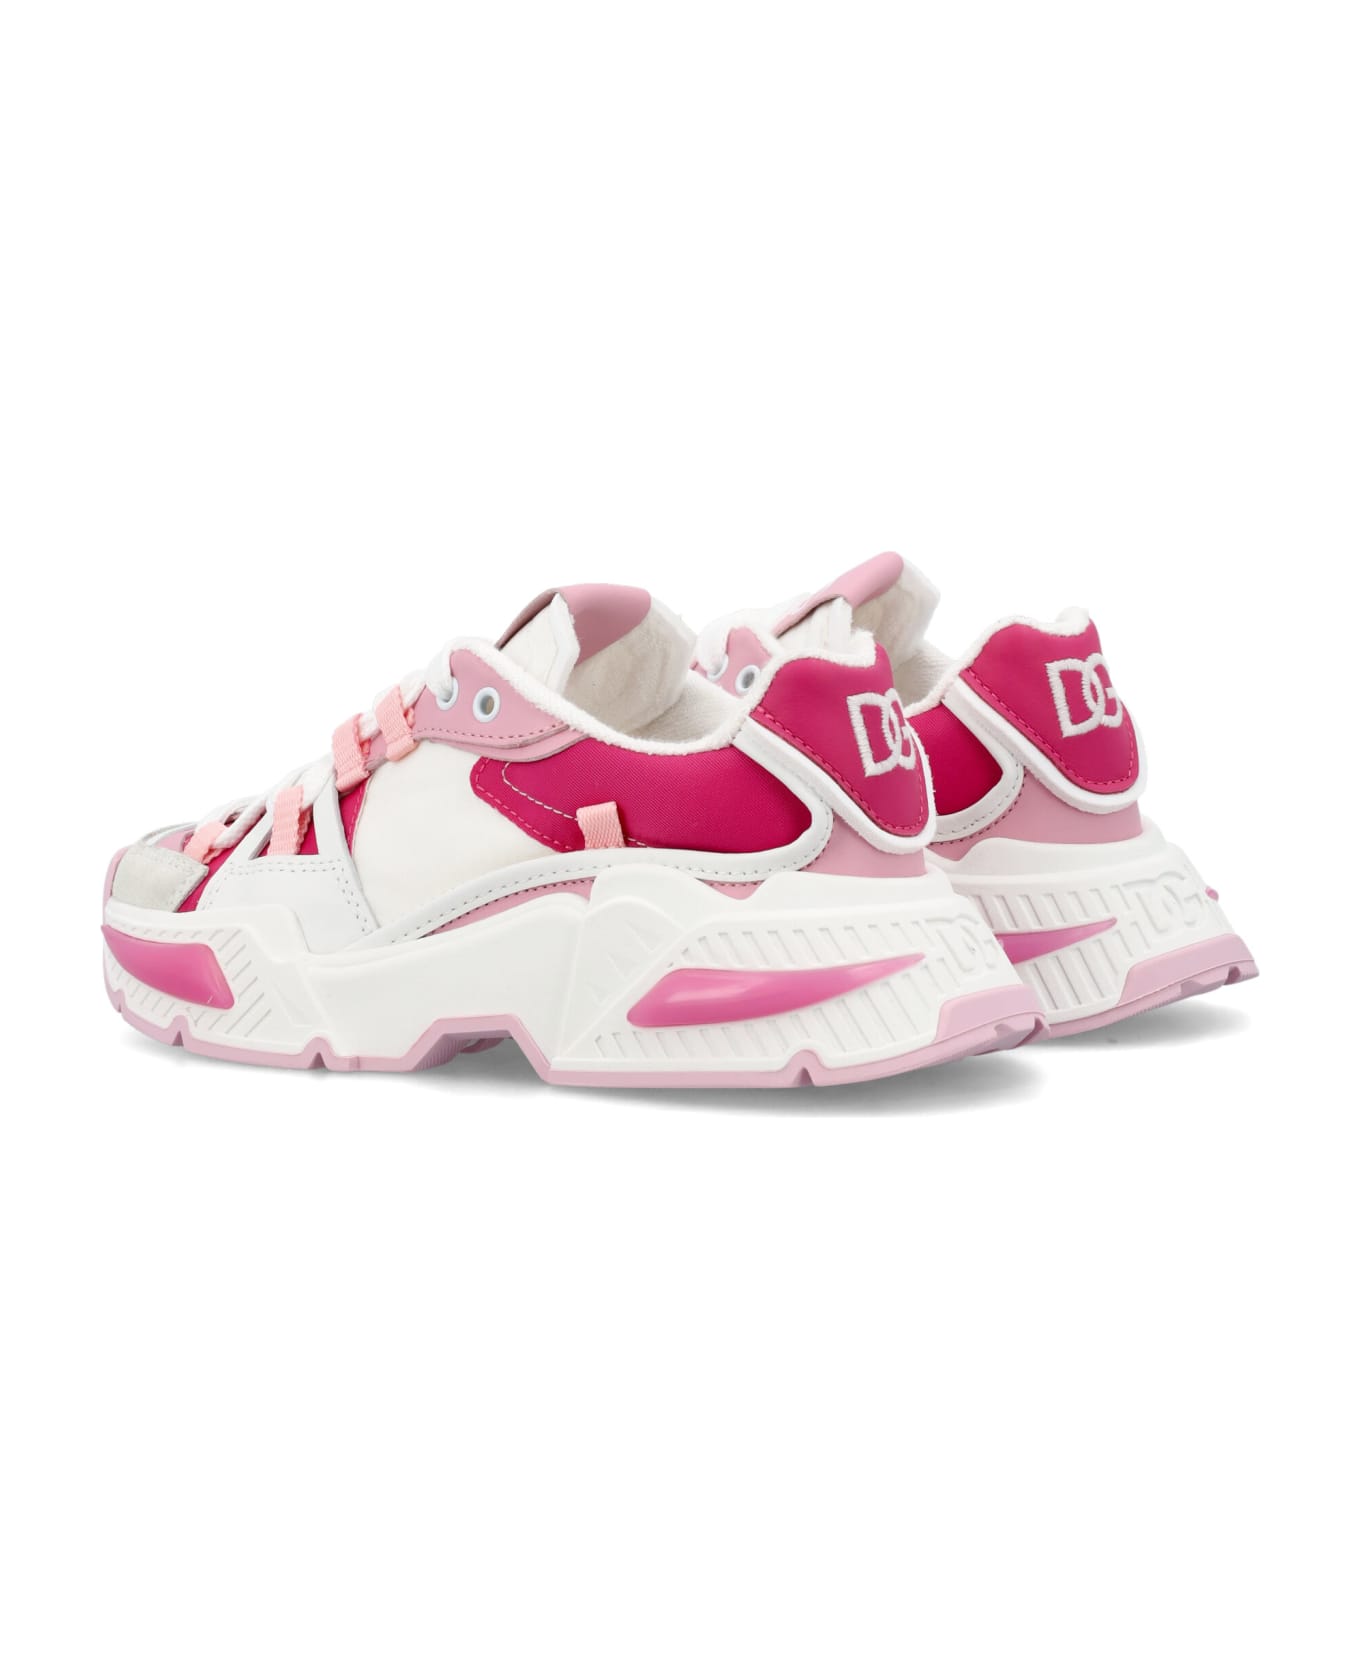 Dolce & Gabbana Airmaster Sneakers - WHITE PINK